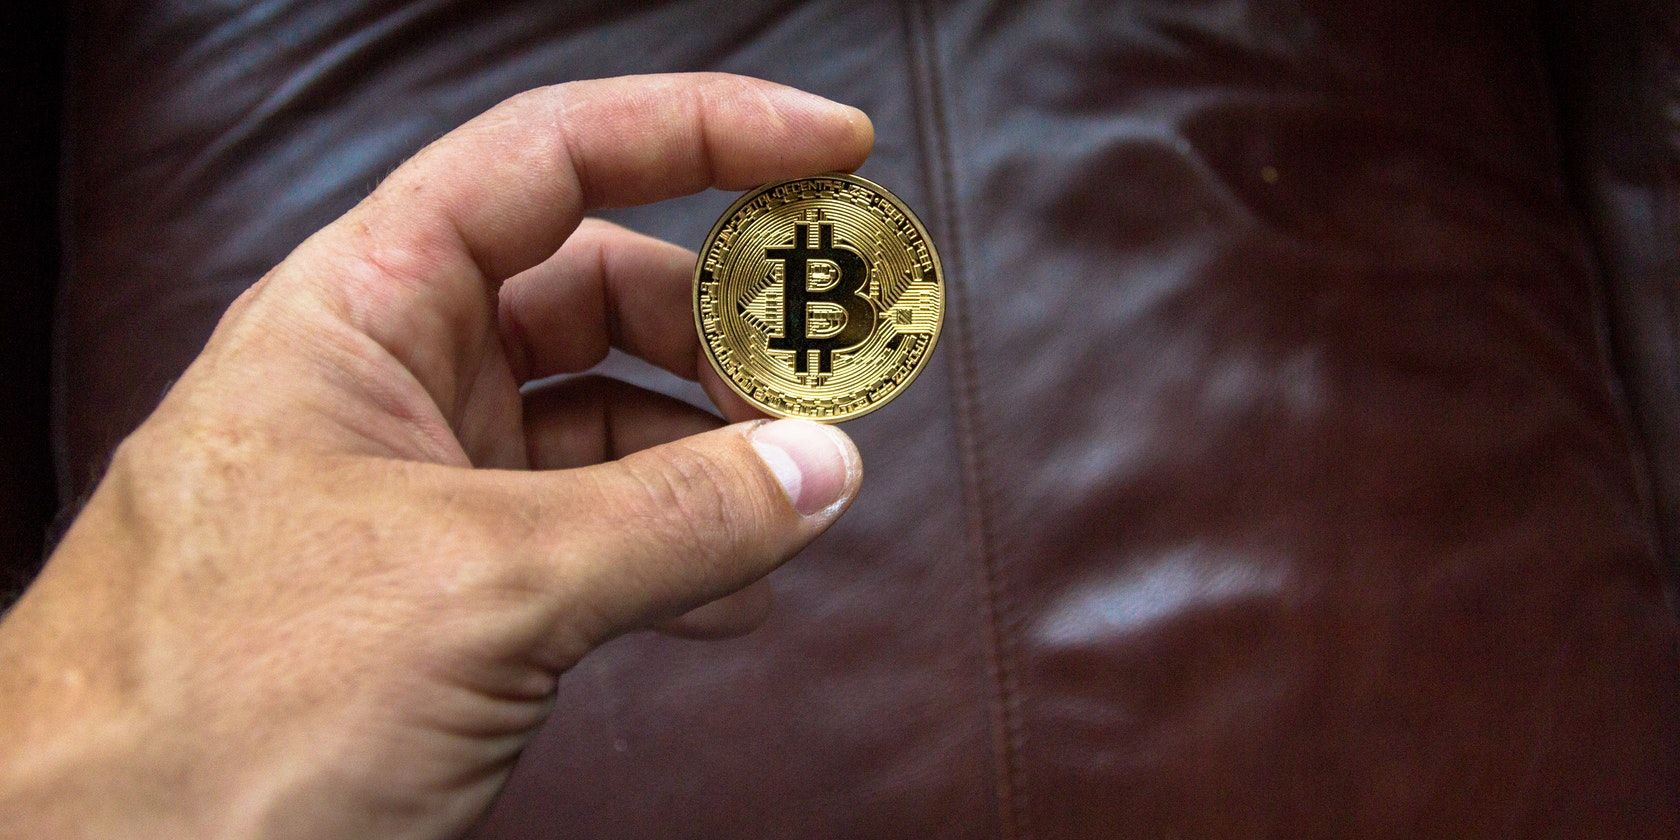 Hand holding a gold coloured Bitcoin